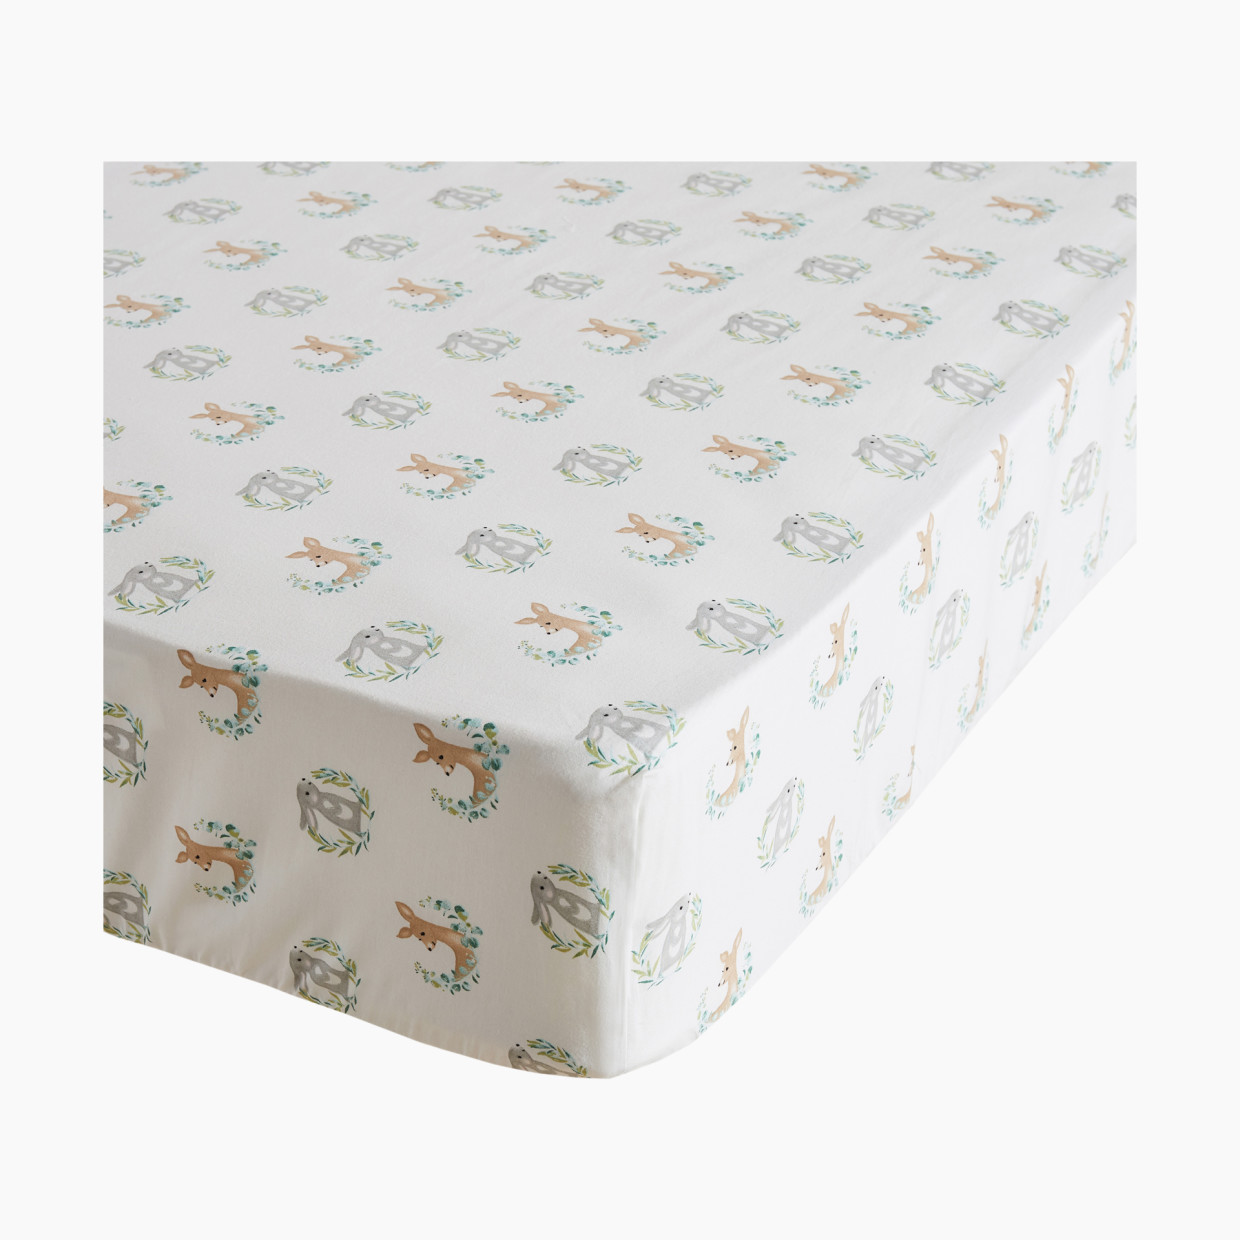 Levtex Baby Fitted Crib Sheet - Woodland Pals.